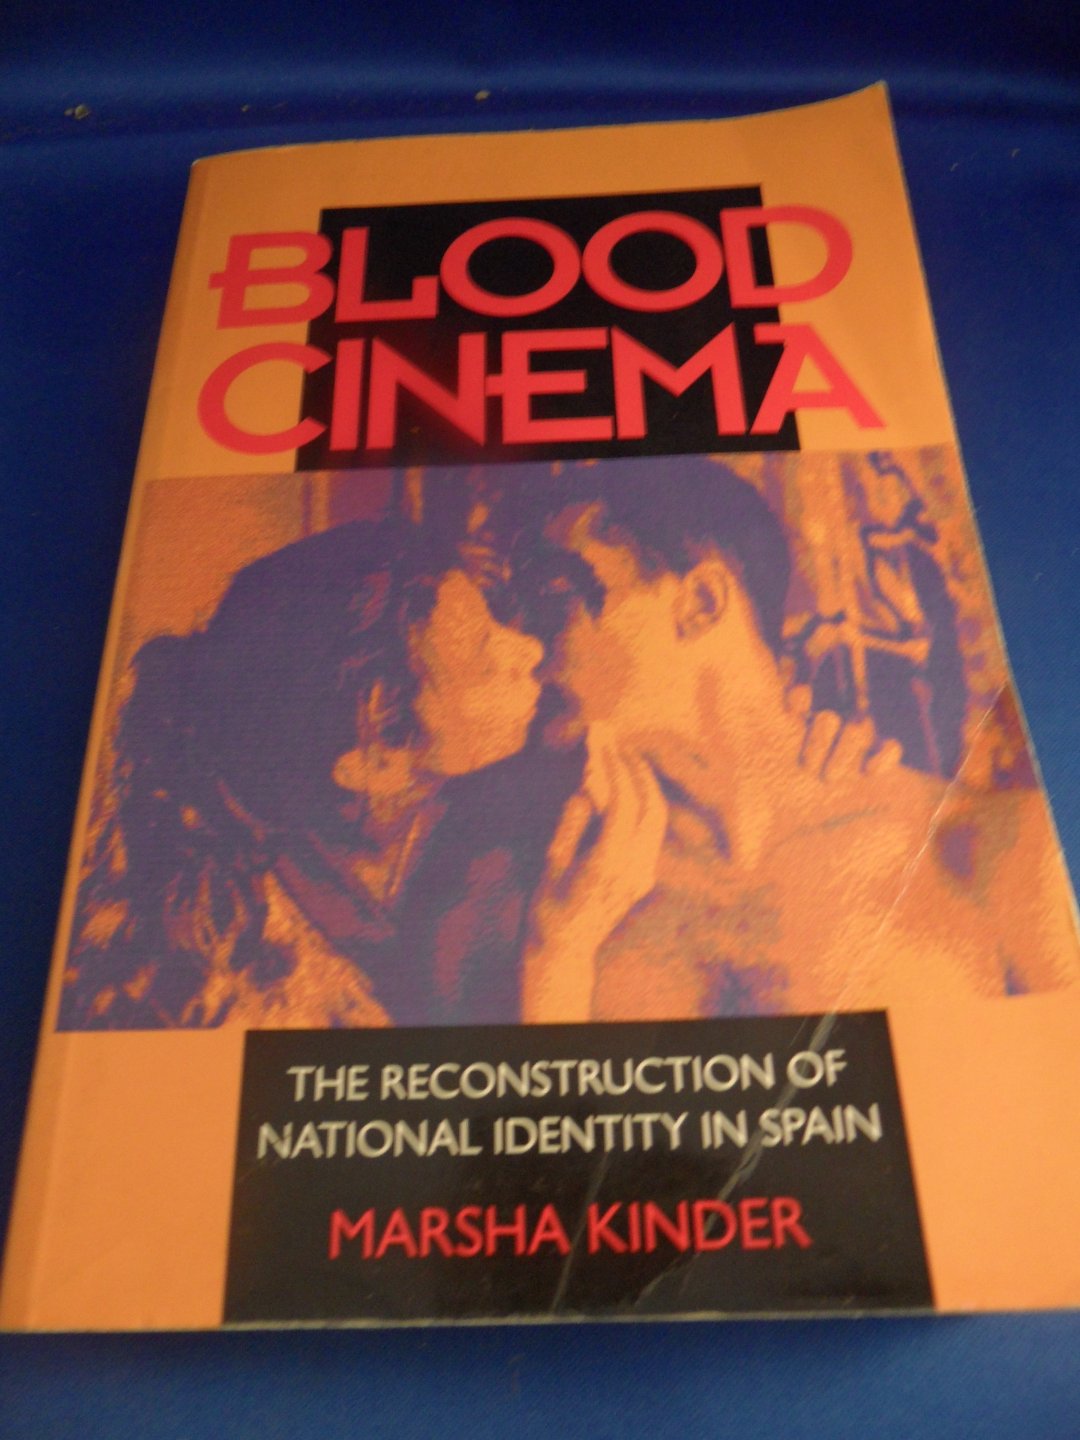 Kinder, Marsha - Blood Cinema. The reconstruction of national identity in Spain